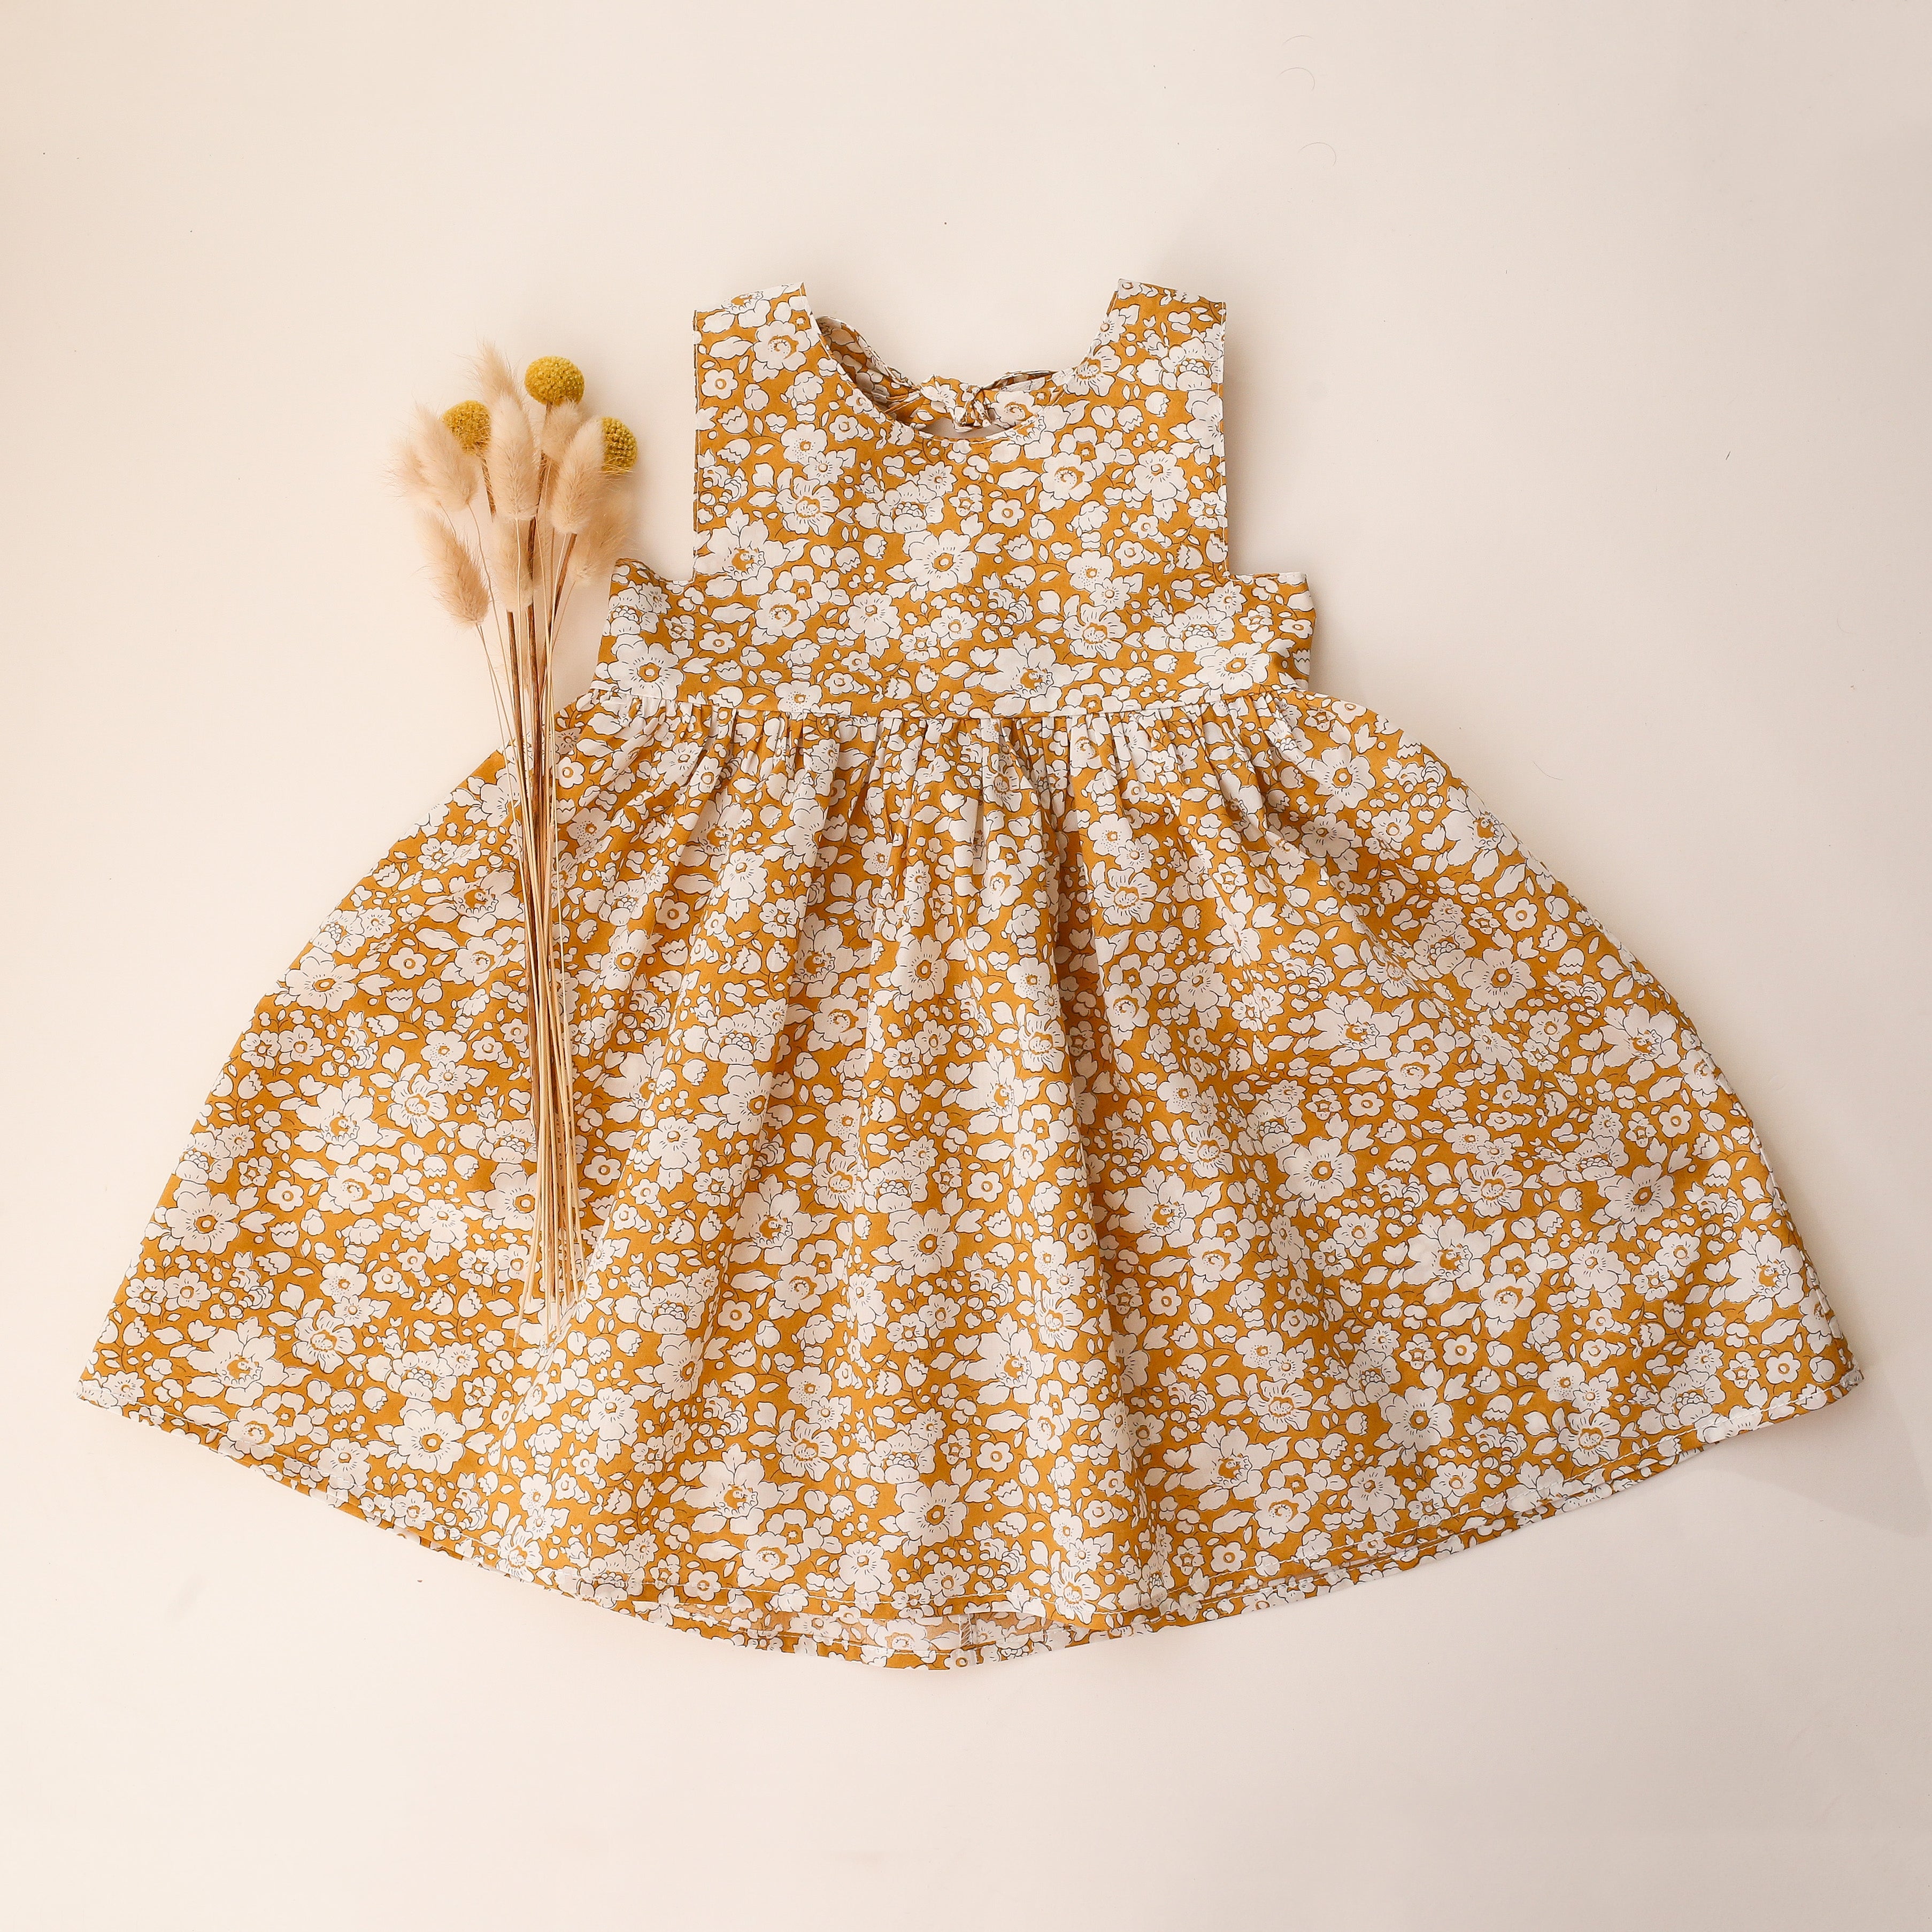 2-3 YRS - Betsy Boo Dress with Cutout Back